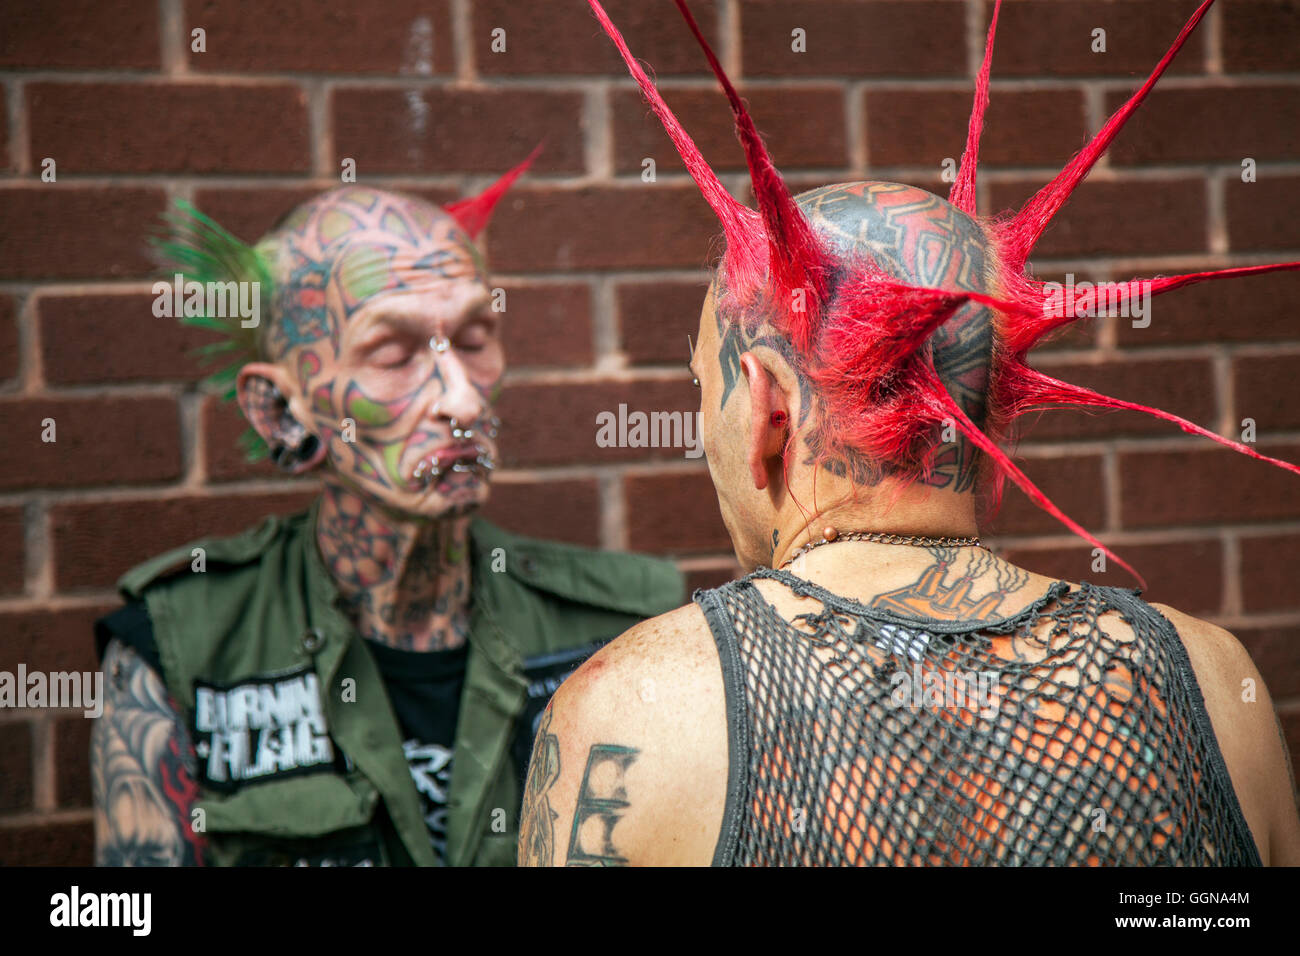 Couple Skinheads, Blackpool, Lancashire, UK. 6th August, 2016. 'Webber' with nose piercing at the 20th anniversary Rebellion fest returned to Blackpool Winter Gardens as one of the world’s biggest punk festivals.  Spiky-haired punks gathered at the UK’s biggest alternative music festival. The Rebellion Festival sees hard rocking punk bands take to the stage at Blackpool’s Winter Gardens every year to the delight of cheering crowds. The resort’s streets are painted every colour of the rainbow as lifelong punk fans with vividly dyed Mohawks, leather jacketsflock to the resort. Stock Photo